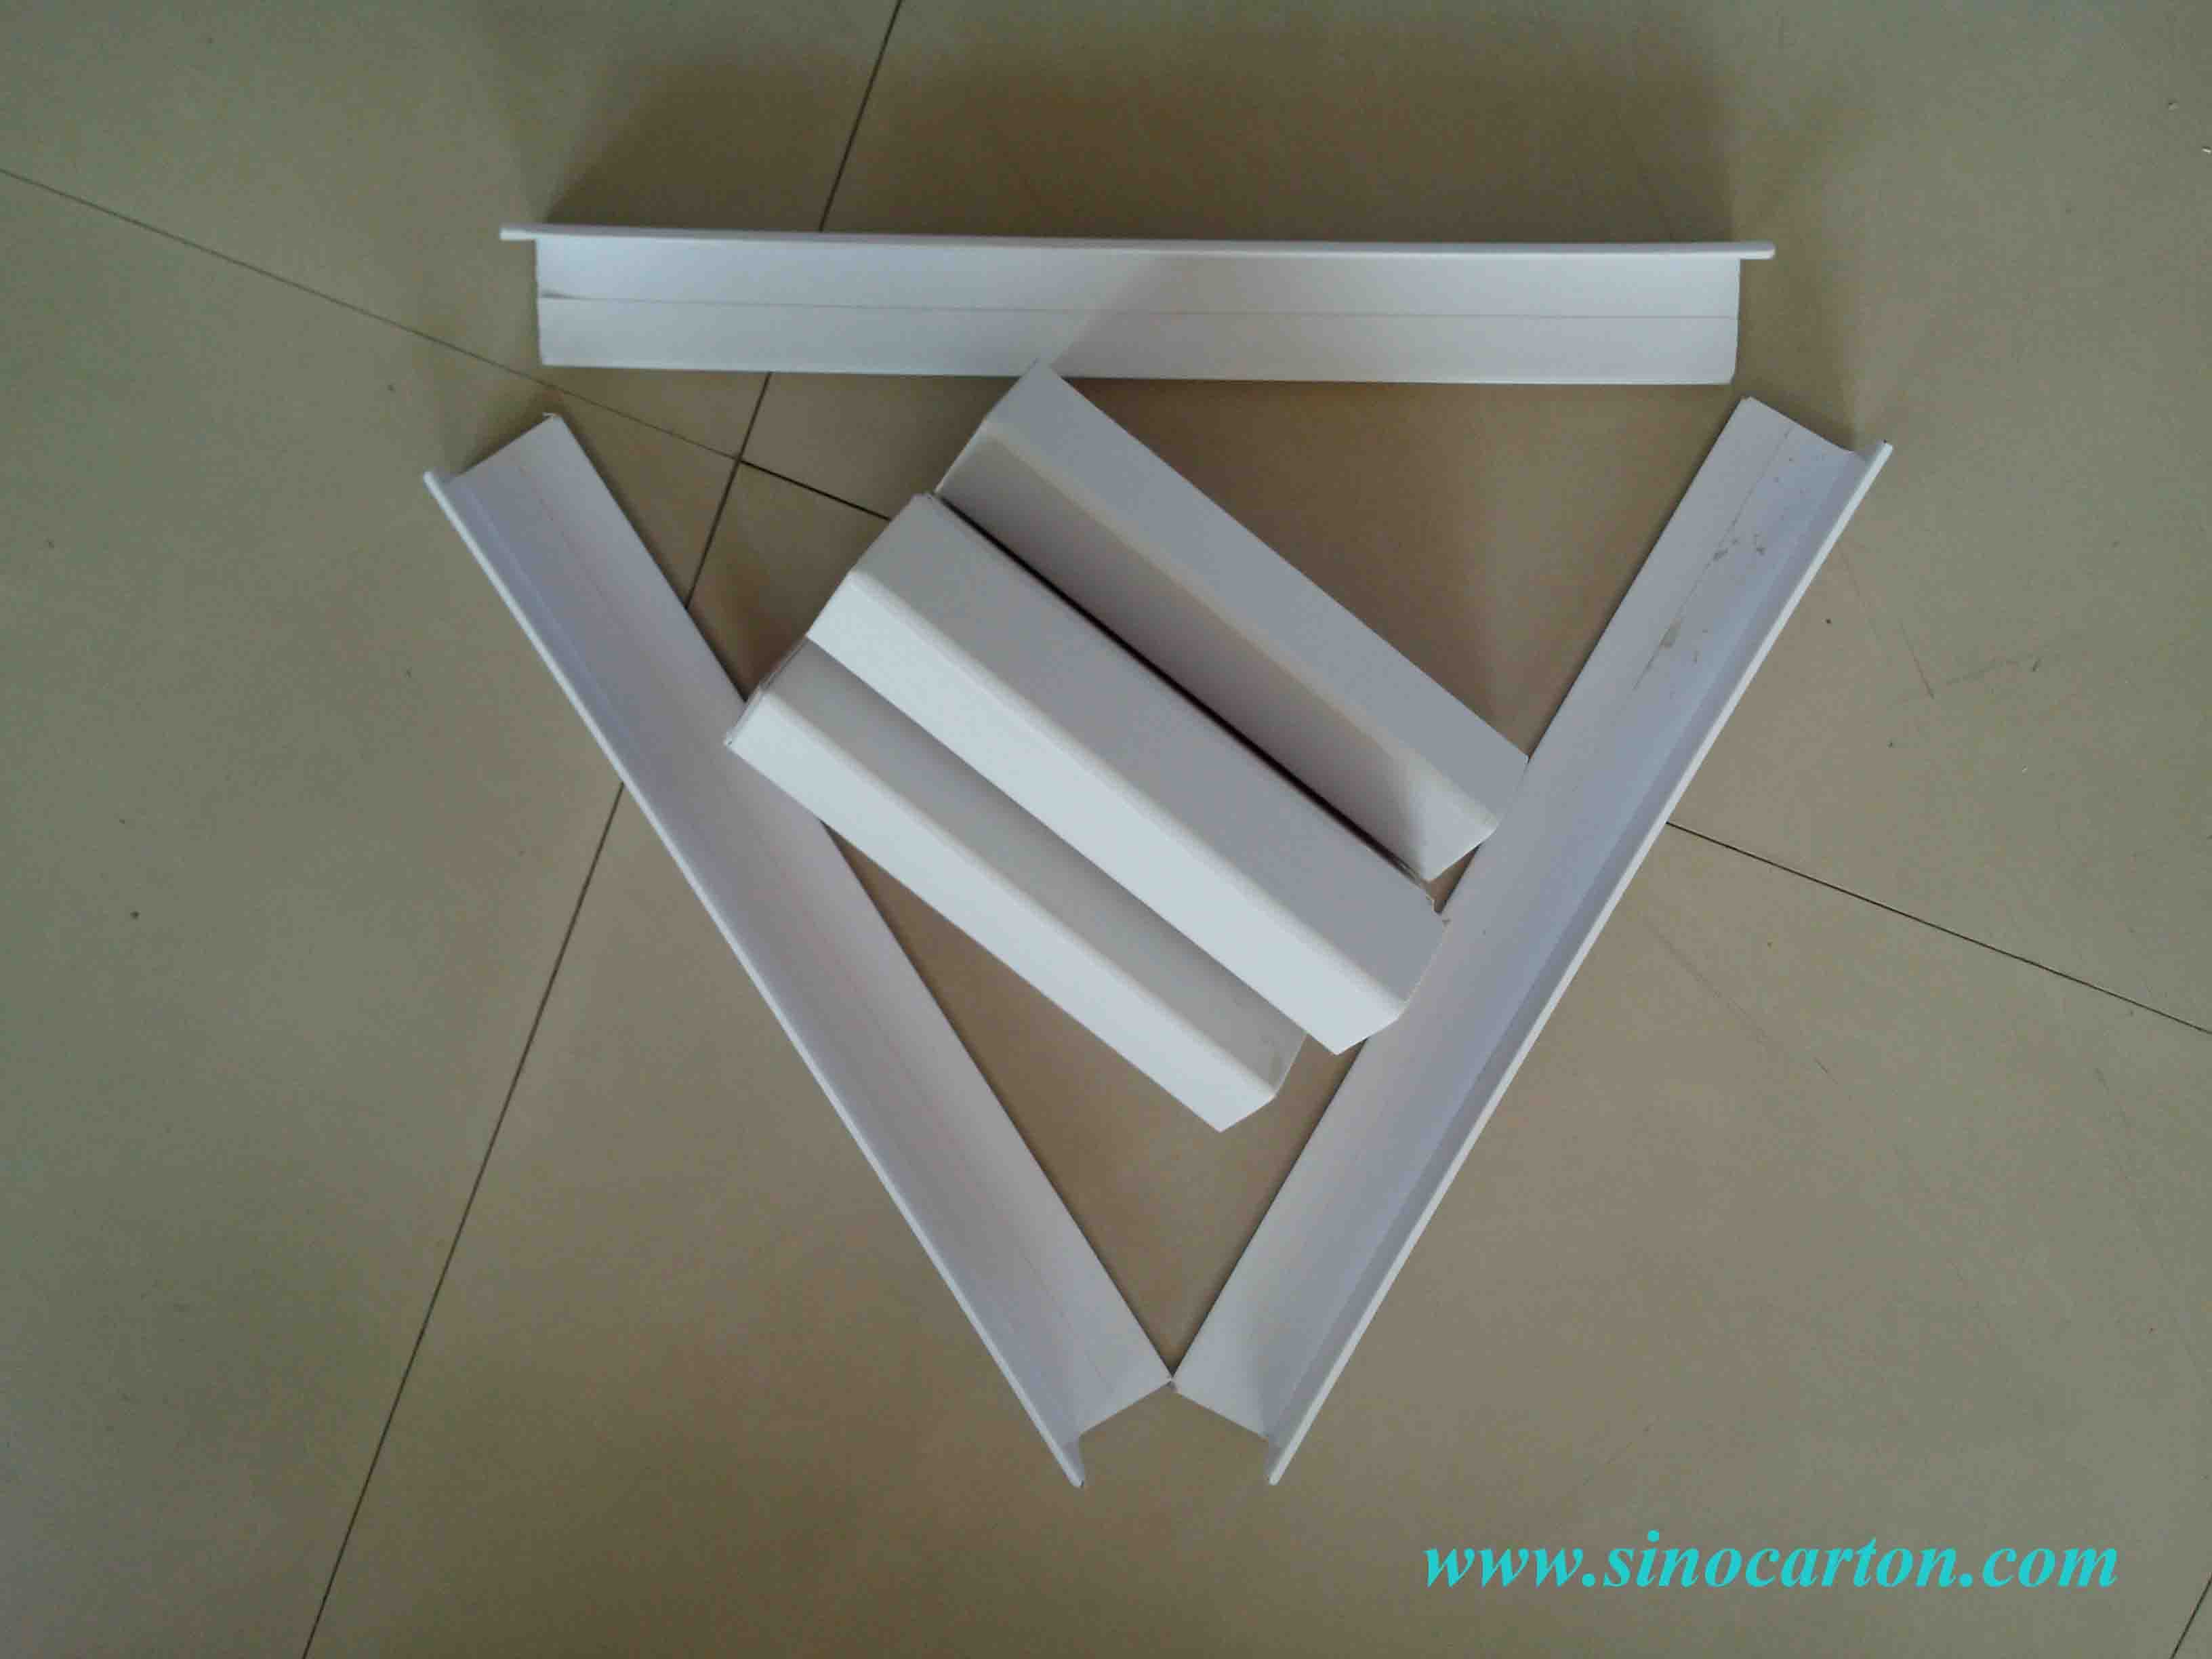 made in China paper angle protector